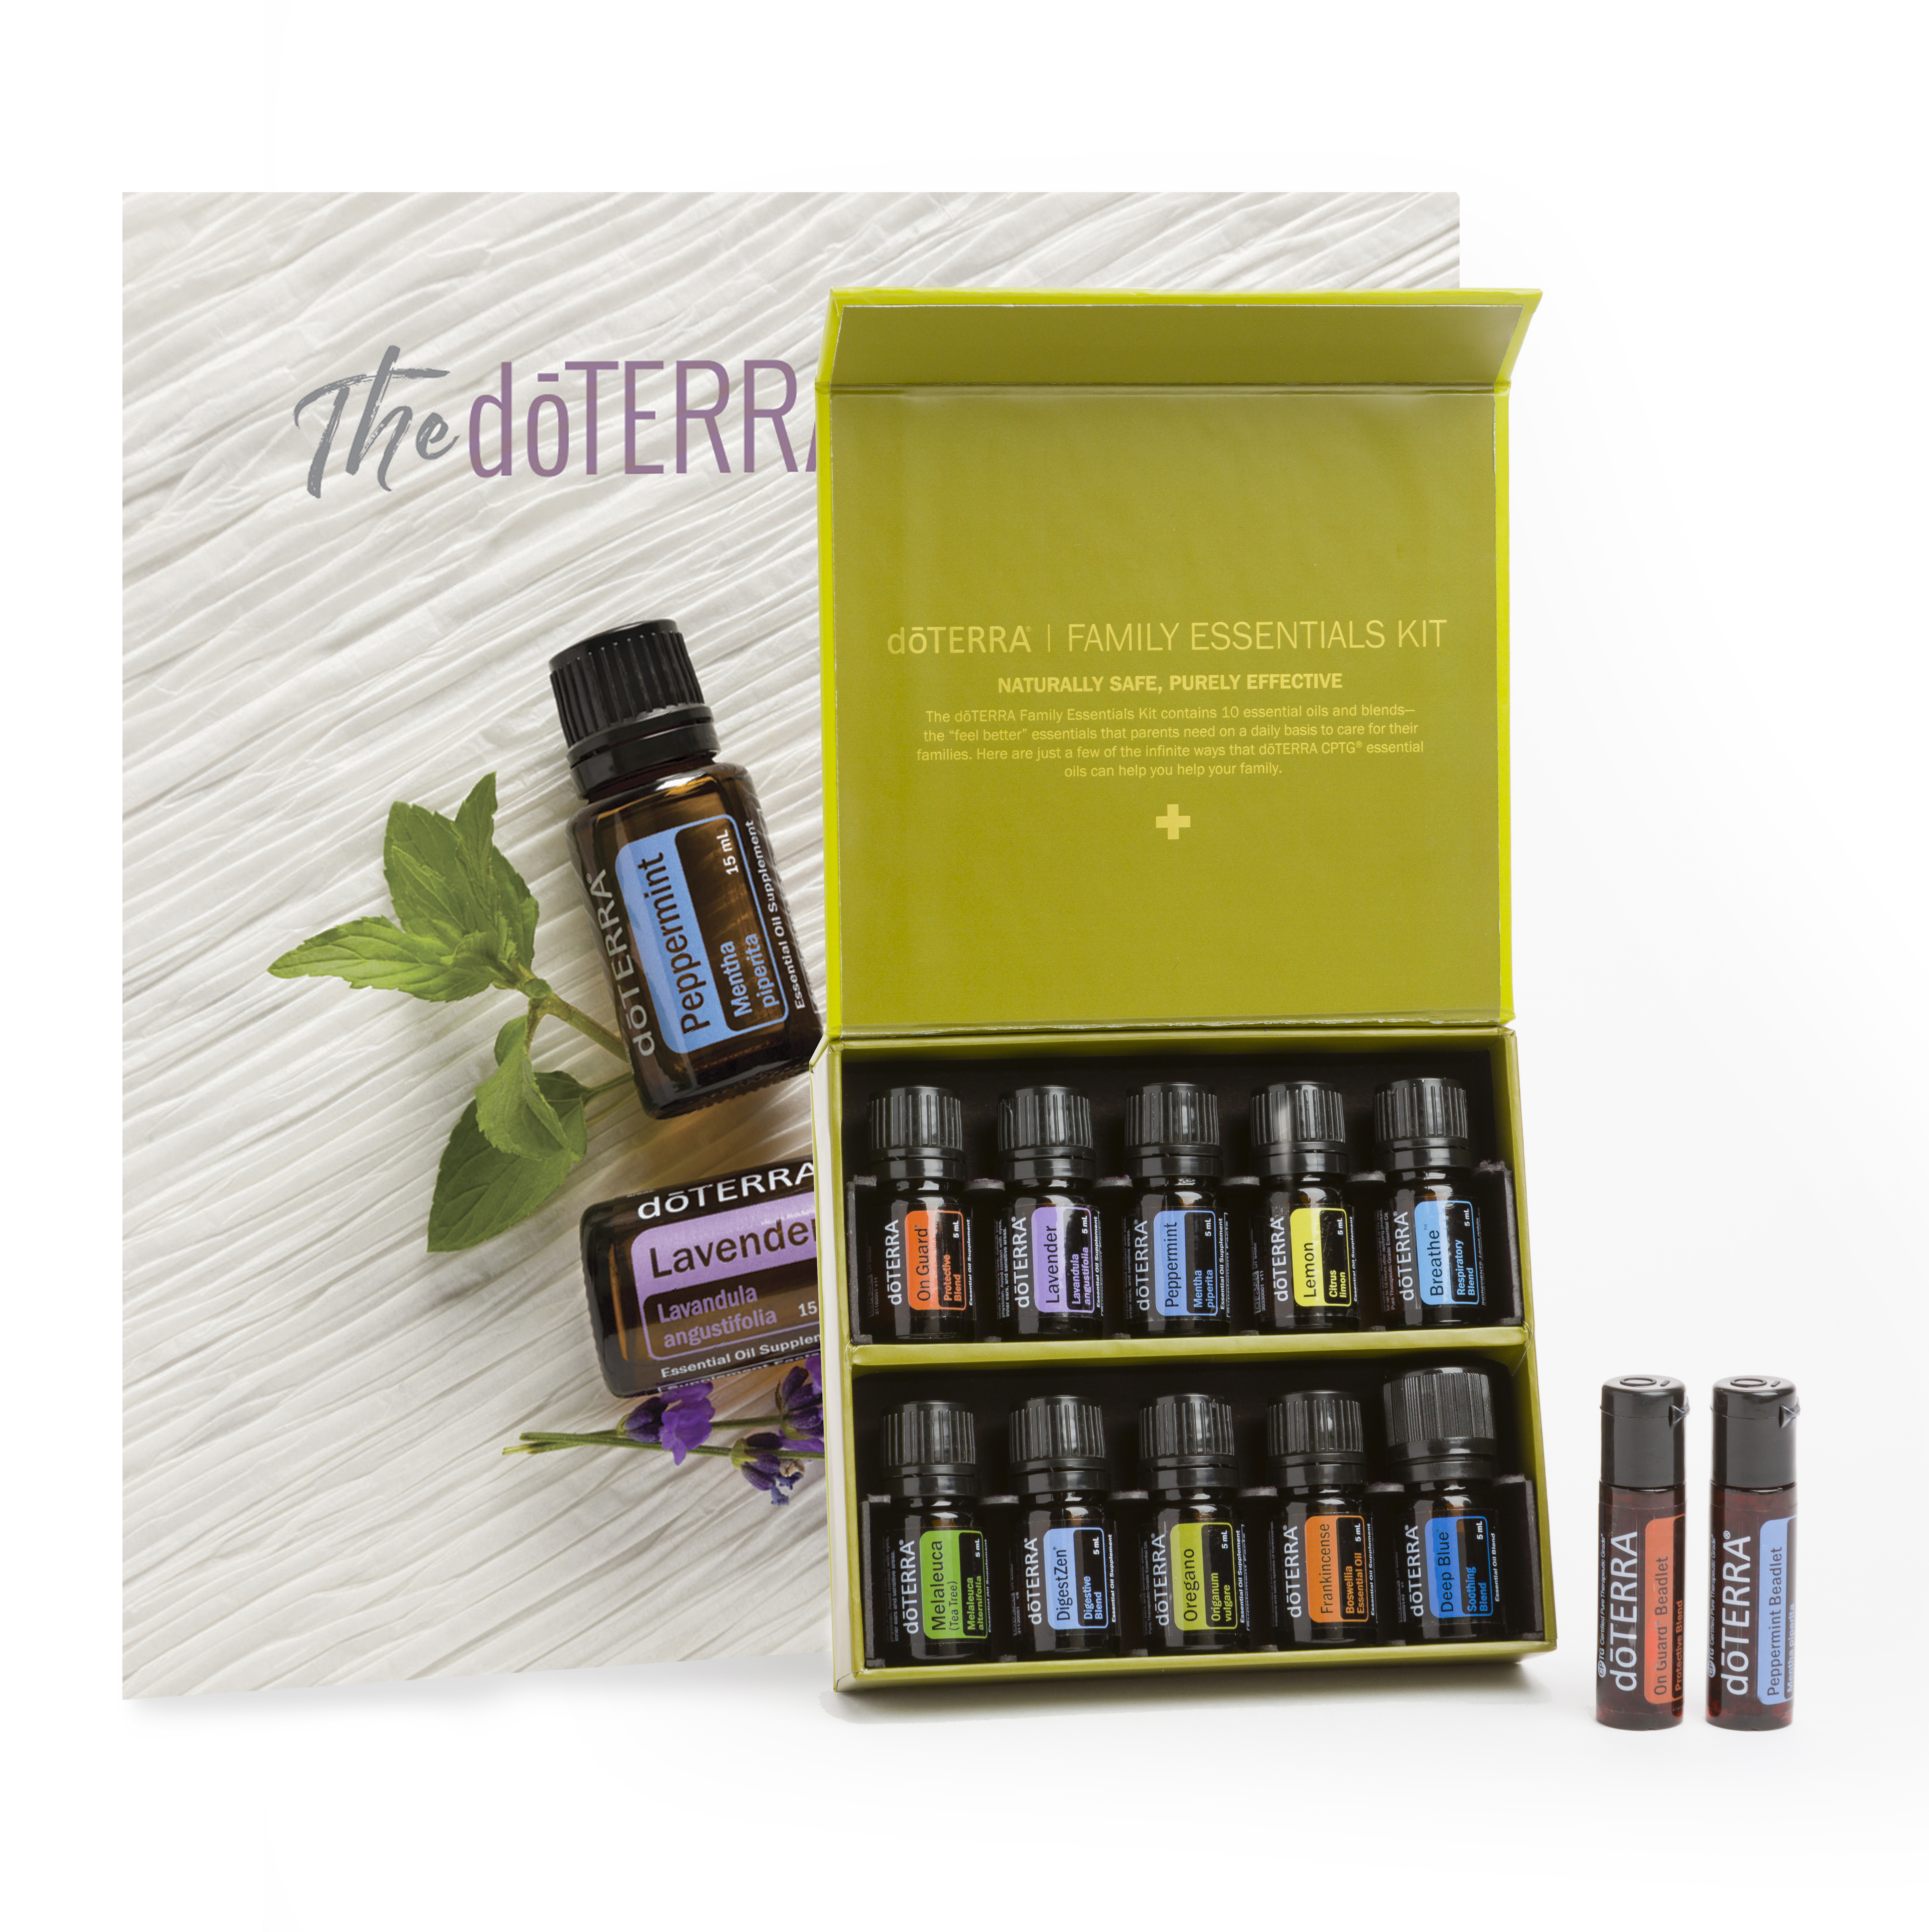 Image Library - Kits & Collections | doTERRA Essential Oils